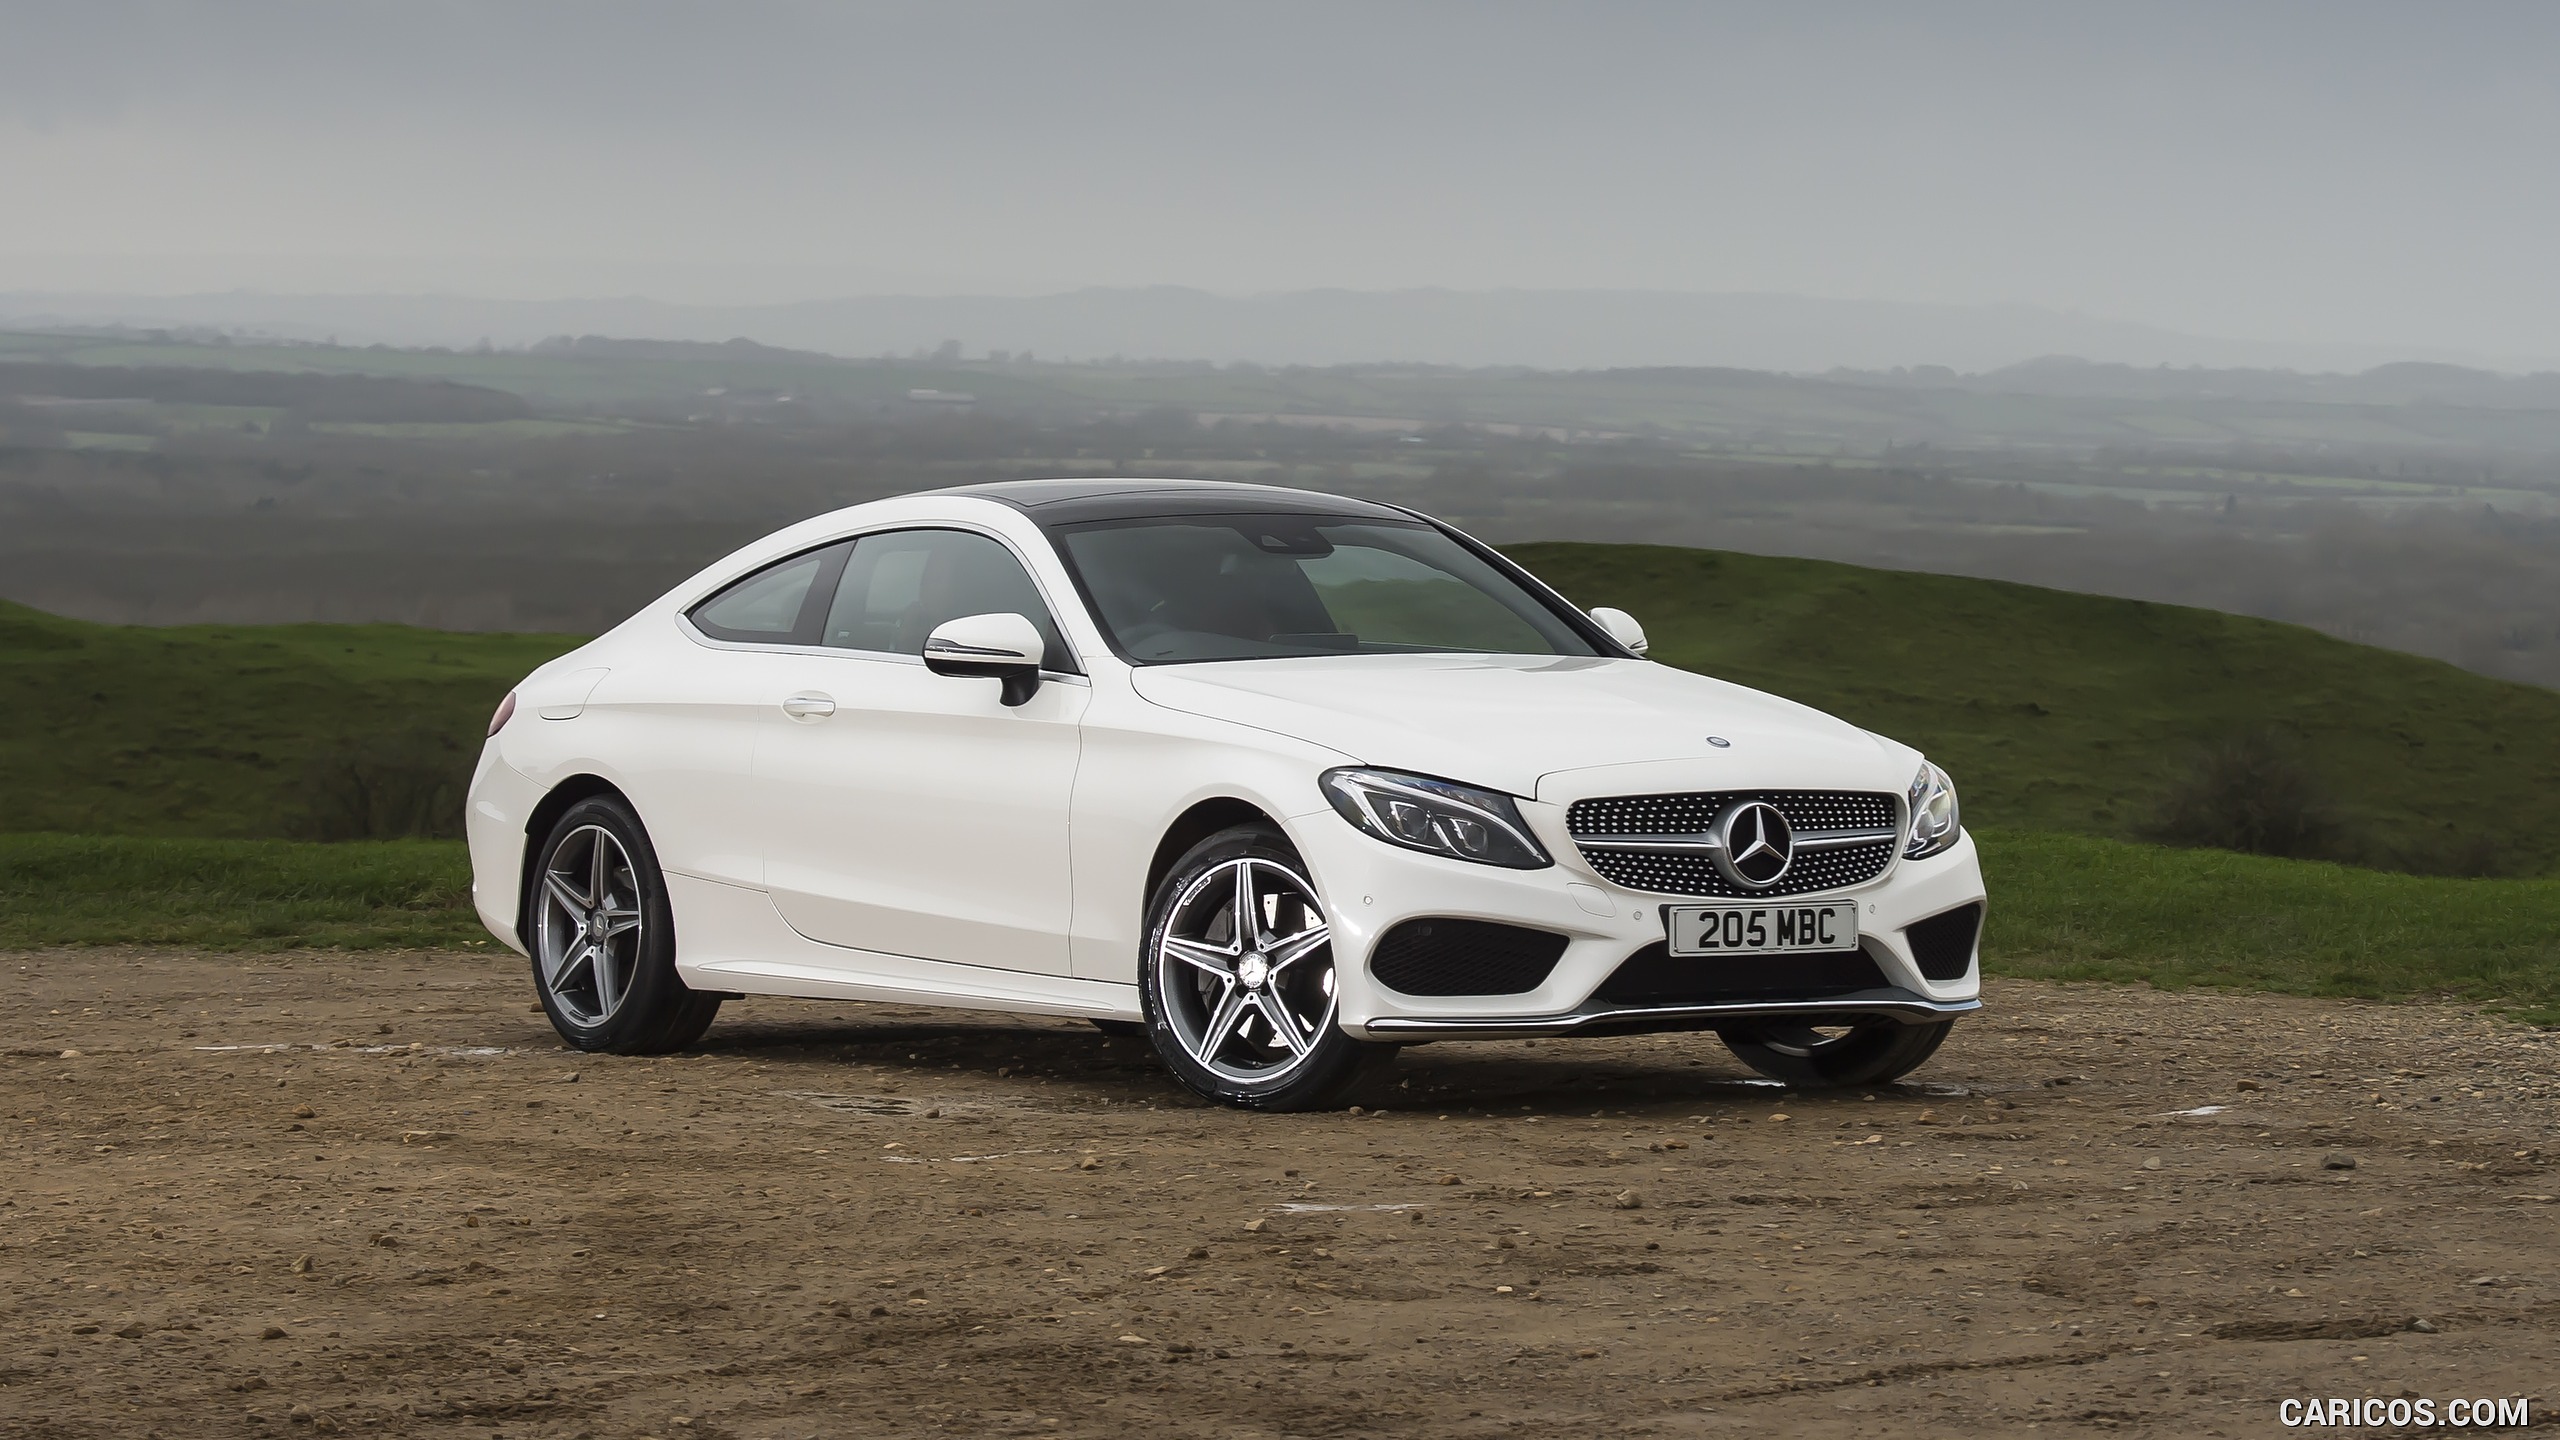 2017 Mercedes-Benz C-Class Coupe (UK-Spec) - Front, #103 of 210